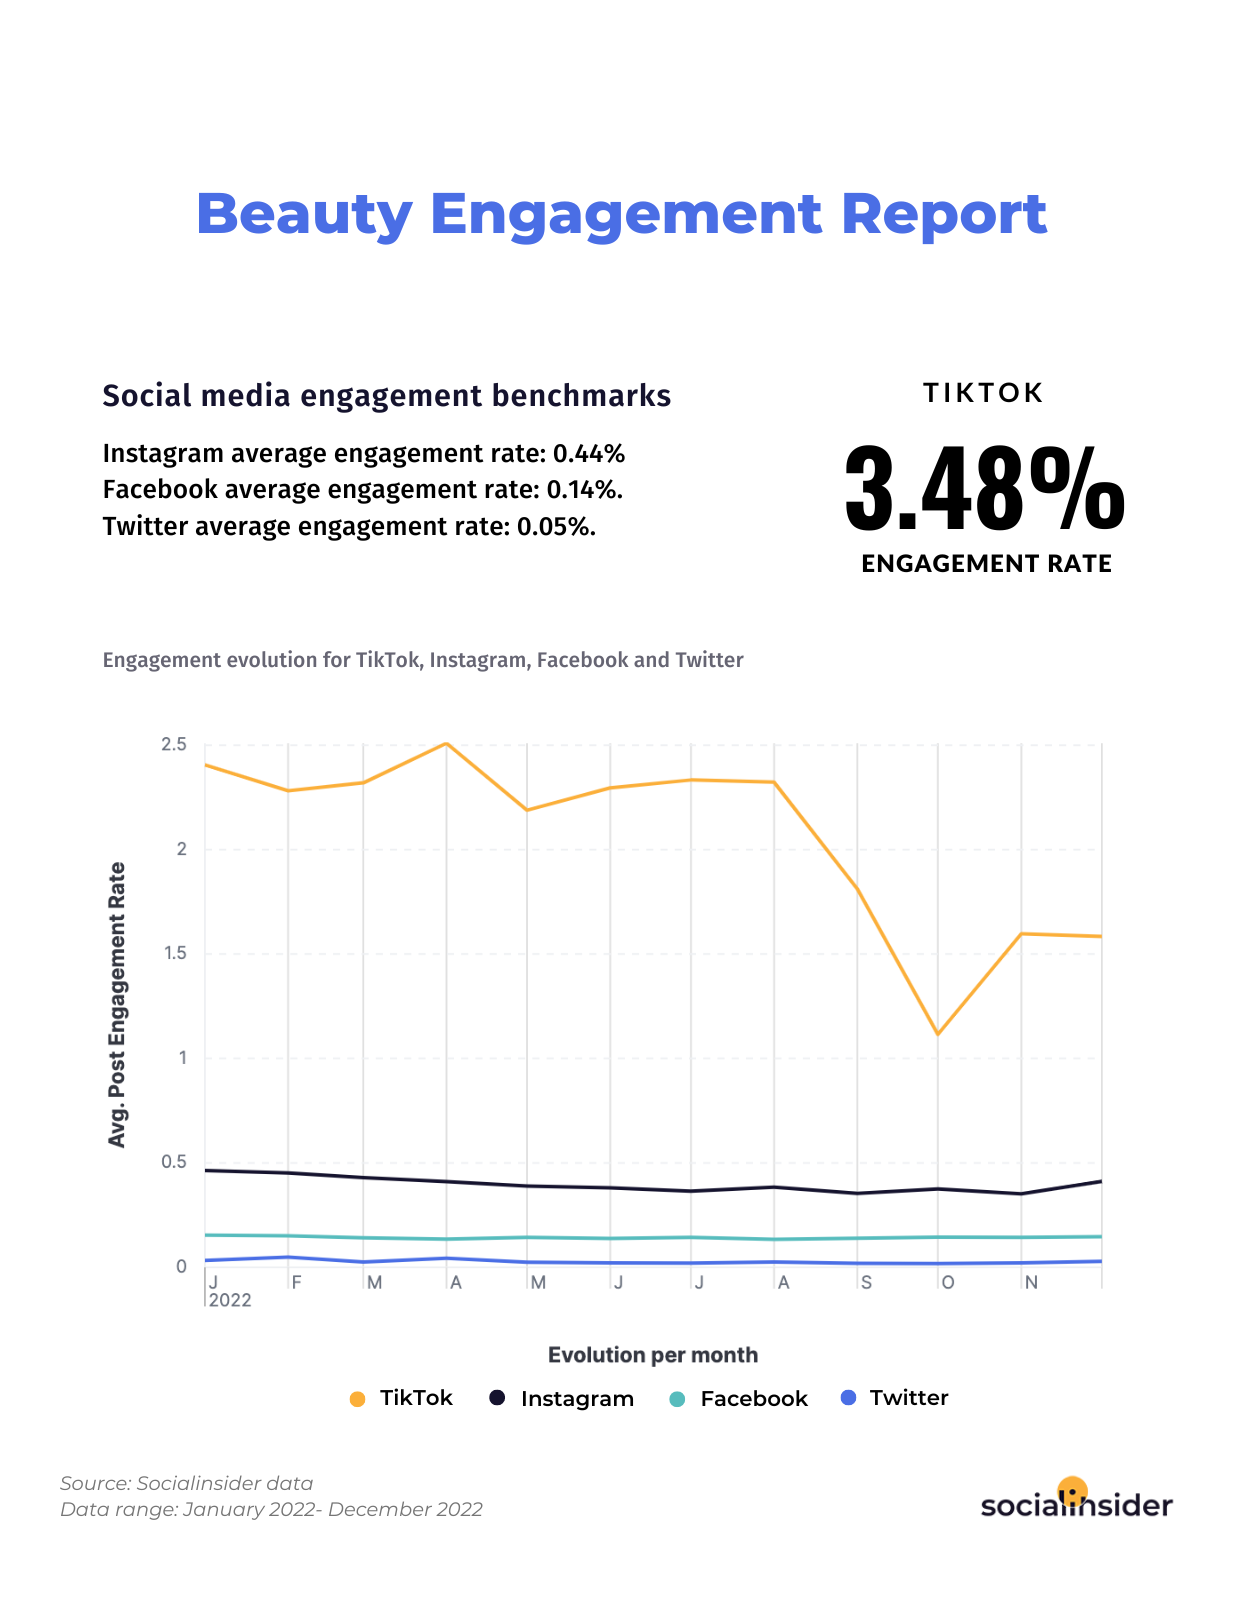 Here you can see 2023 social media engagement benchmarks for beauty brands.